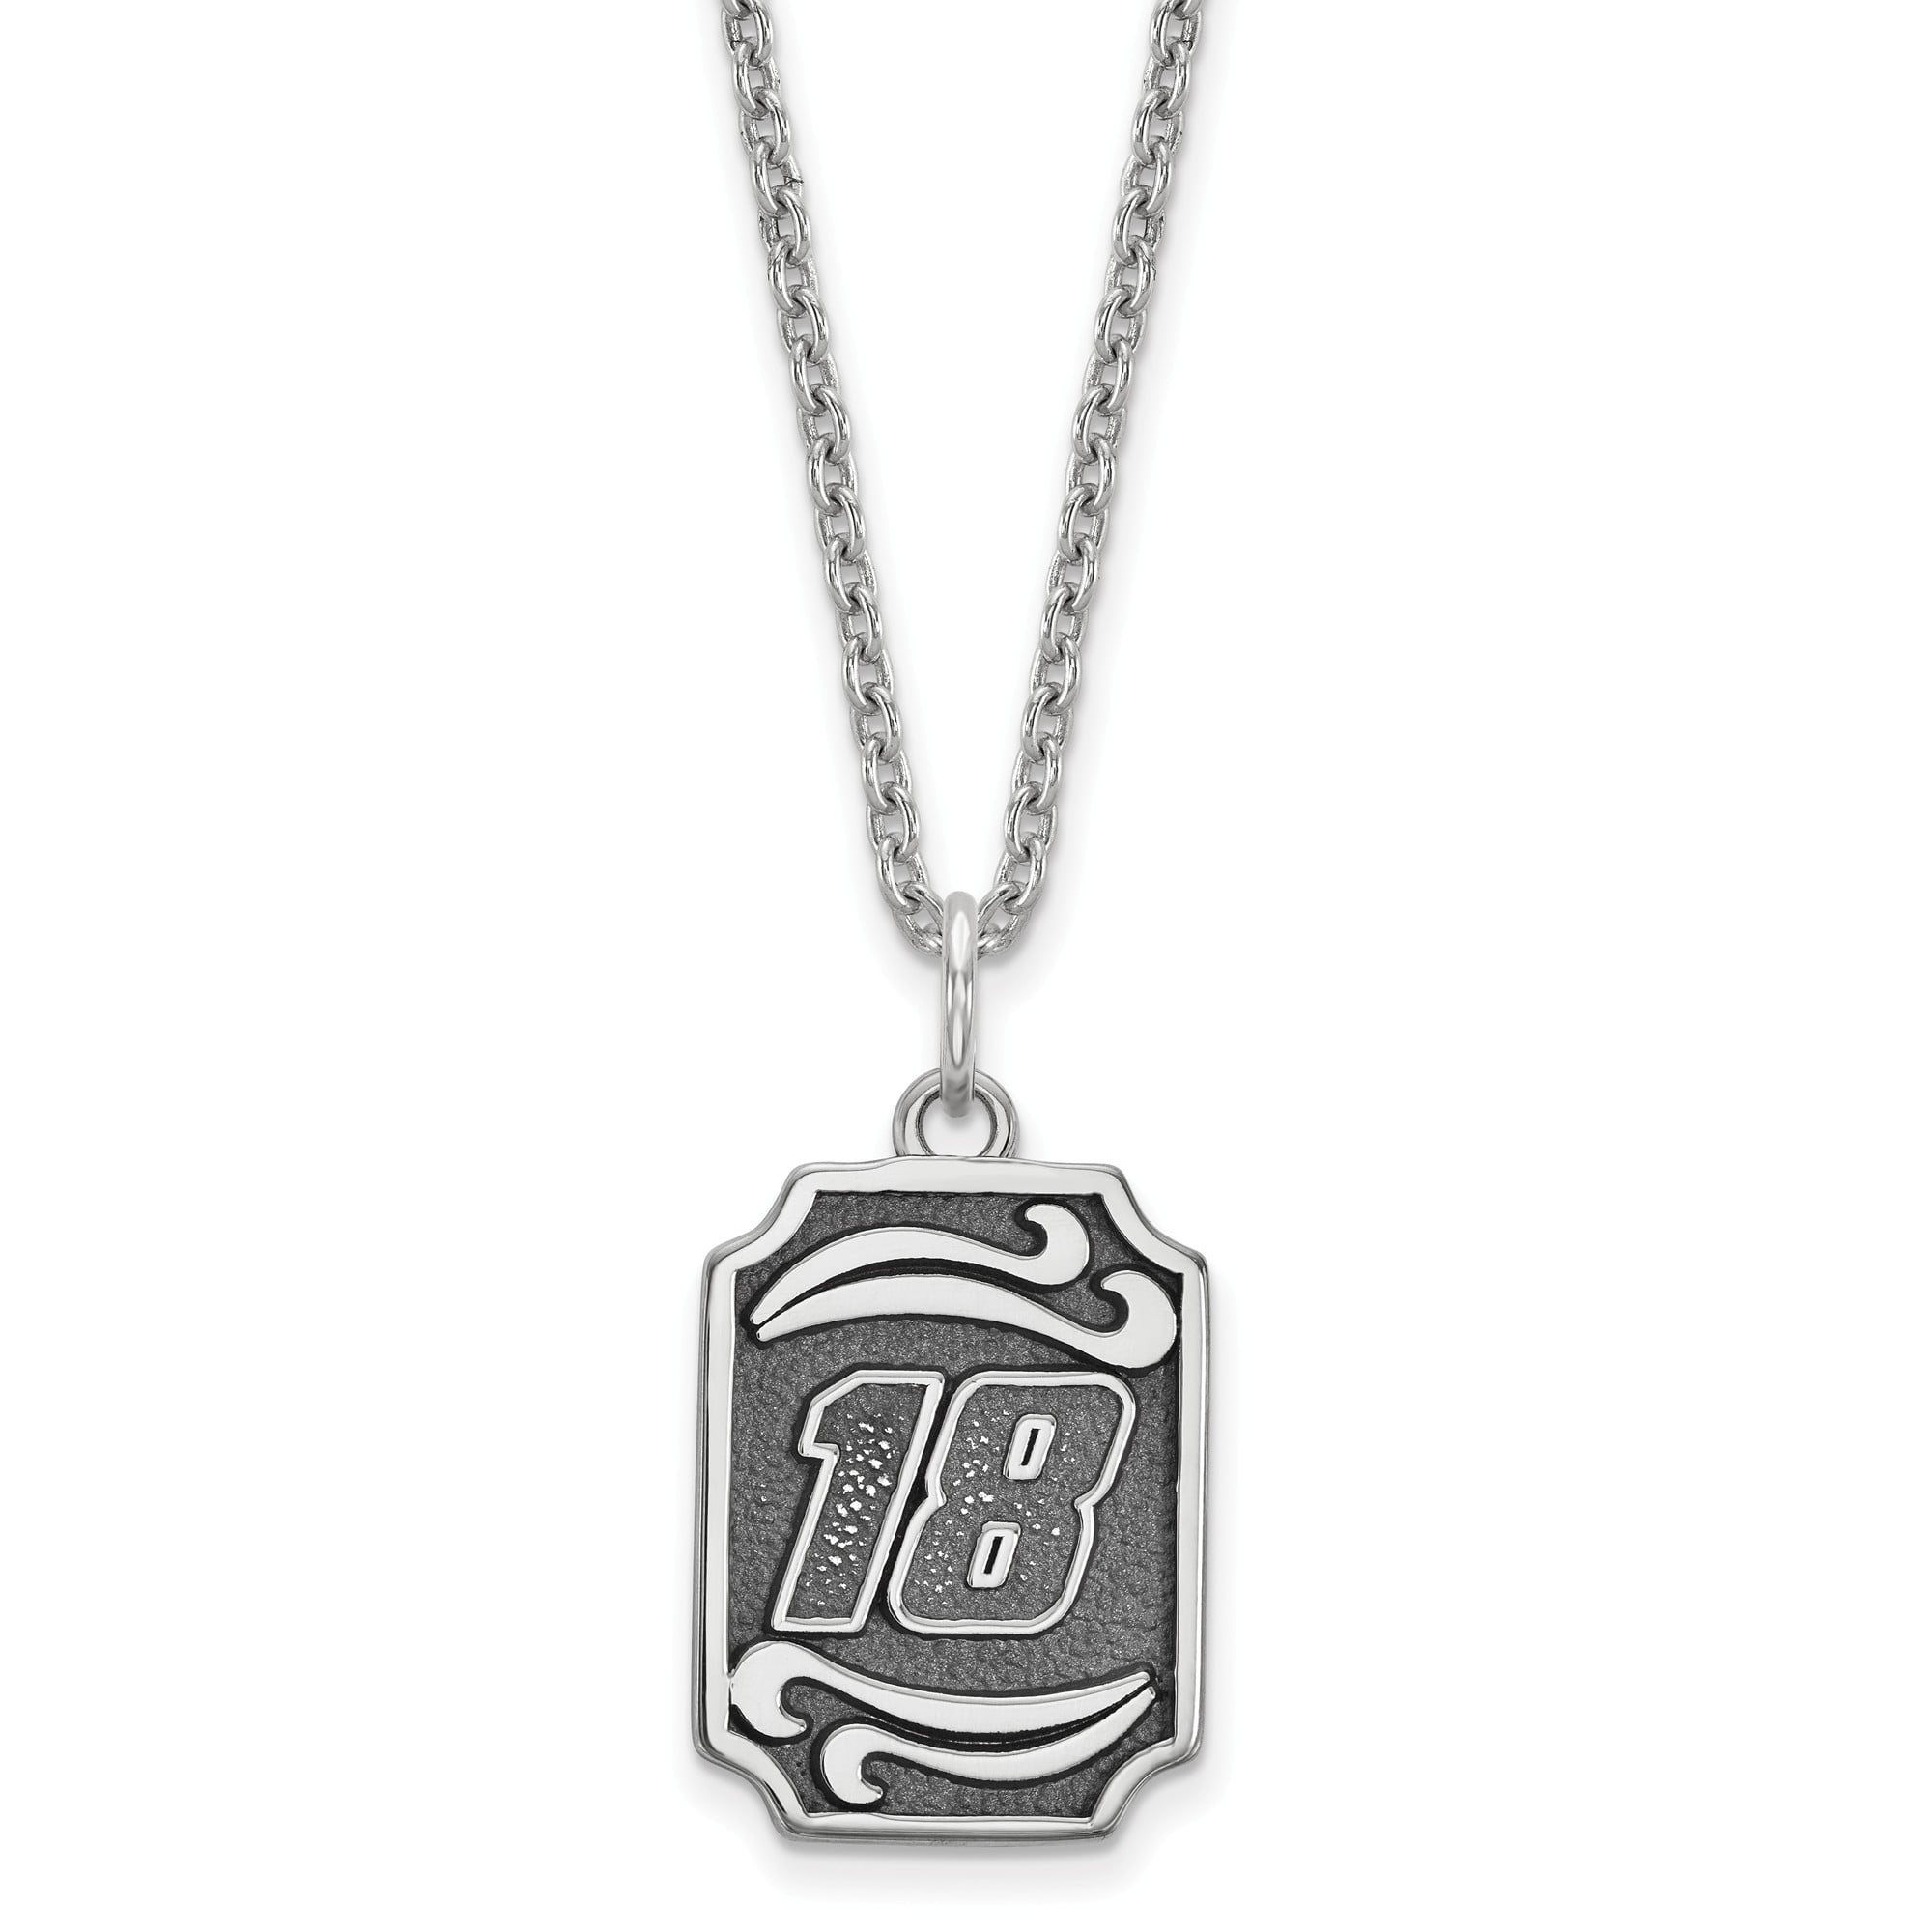 great photo pendant necklace w18 silver chain